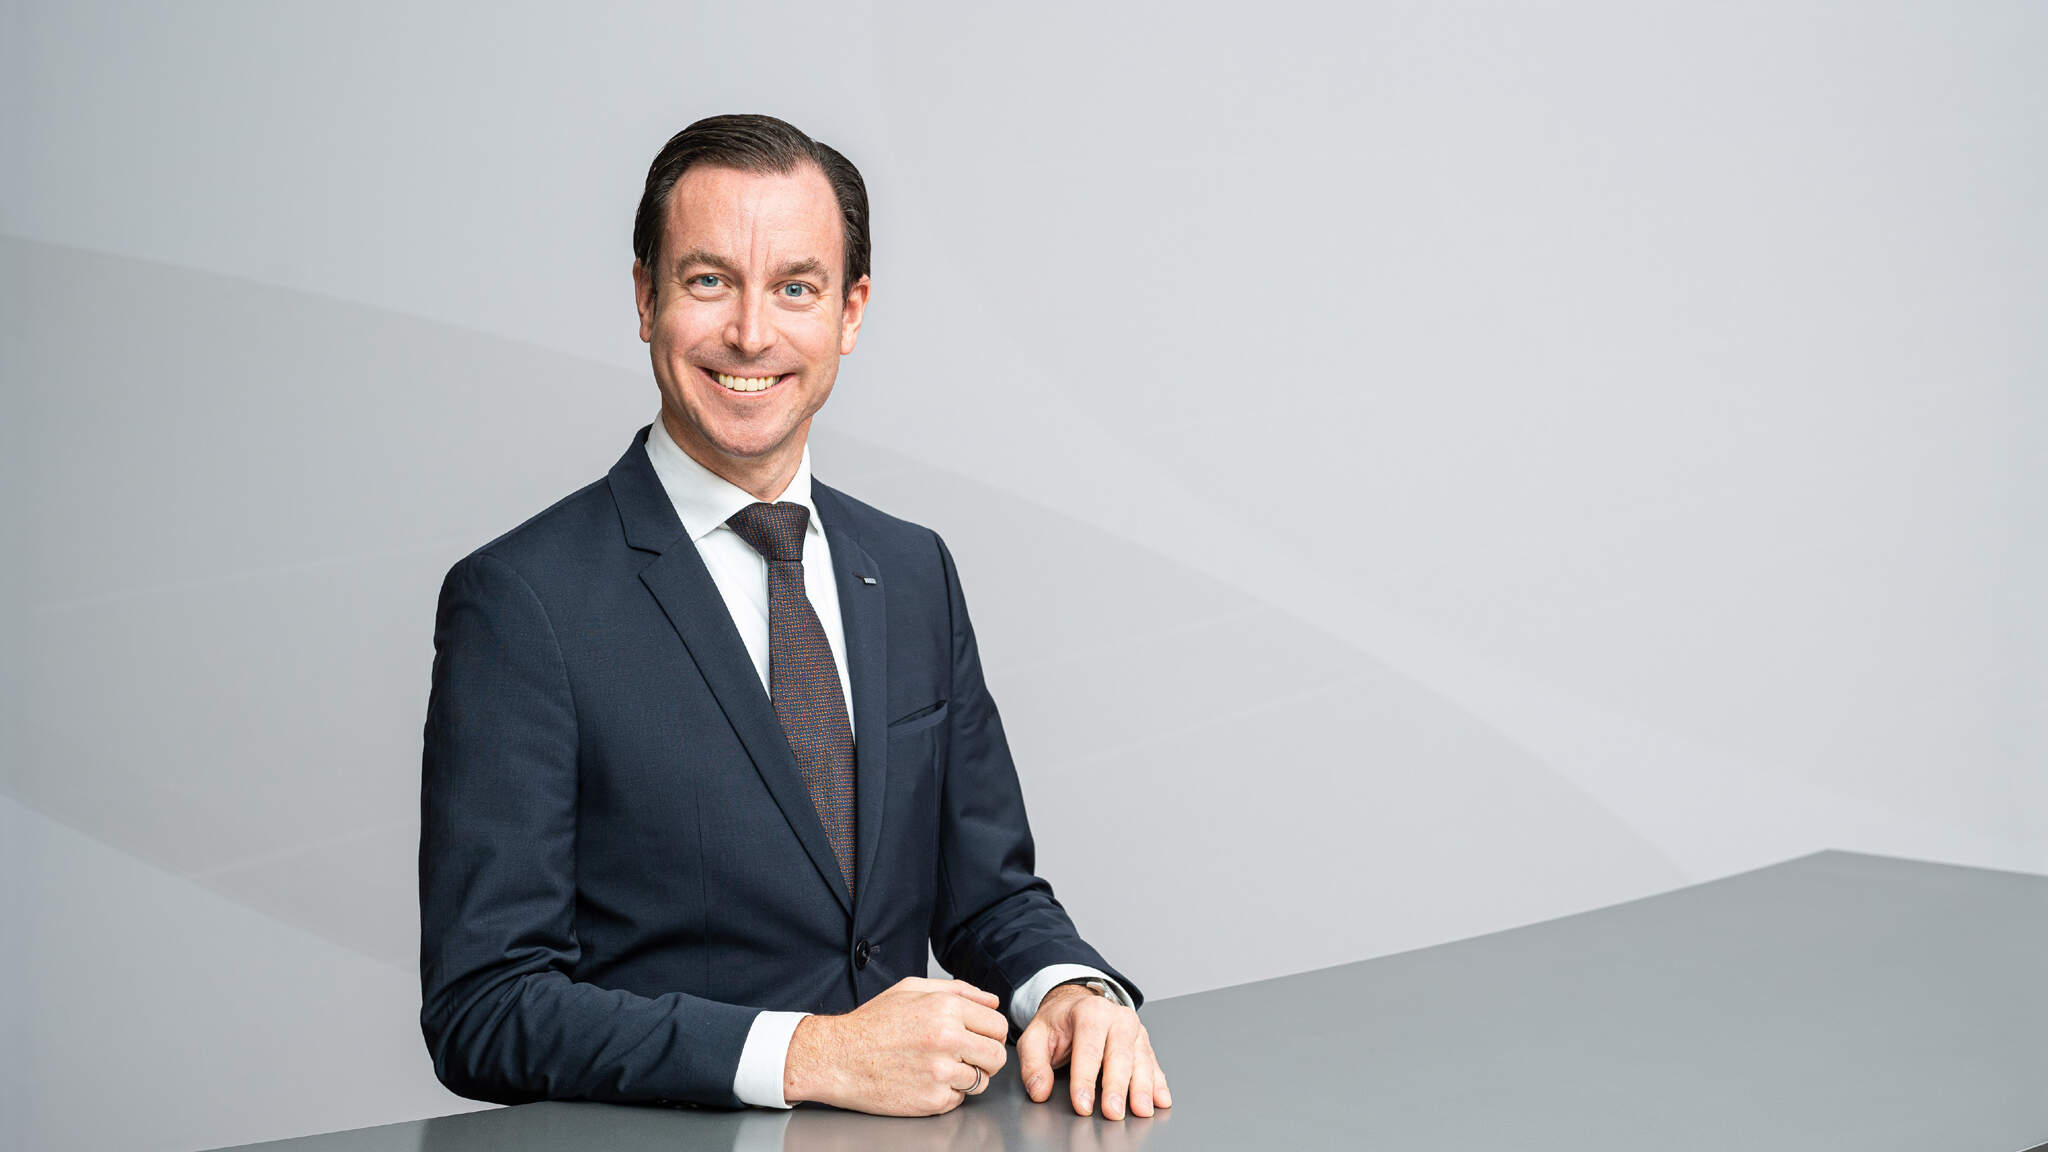 Since the turn of the year, Dr. Tobias Burger (46) has been the new Chief Operations Officer (COO) Air & Sea Logistics and a member of the Executive Board at logistics provider DACHSER.